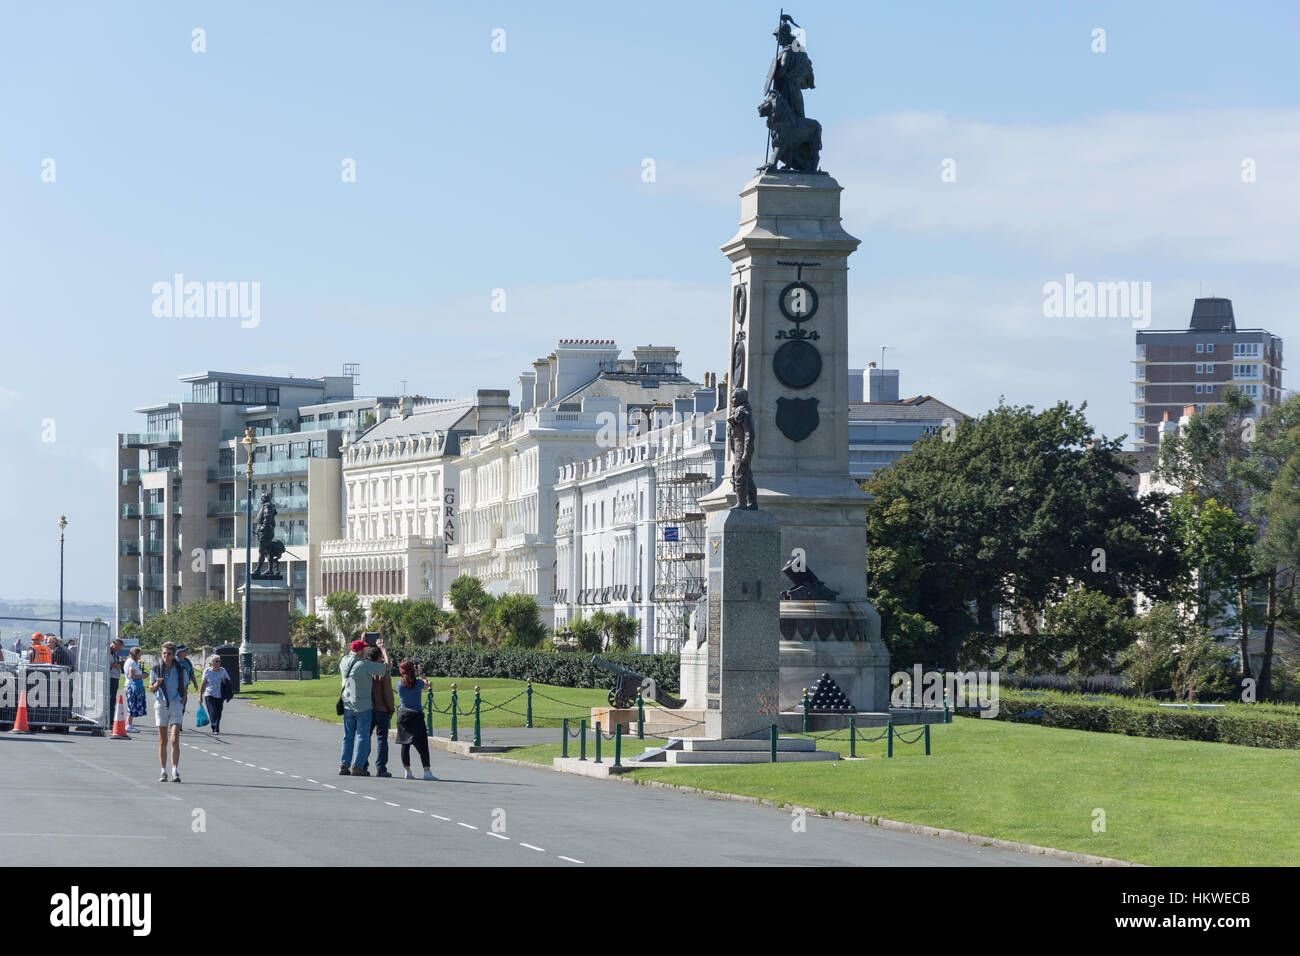 Royal Naval War, National Armada & Royal Air Force Memorials, Plymouth Hoe, Plymouth, Devon, Angleterre, Royaume-Uni Banque D'Images